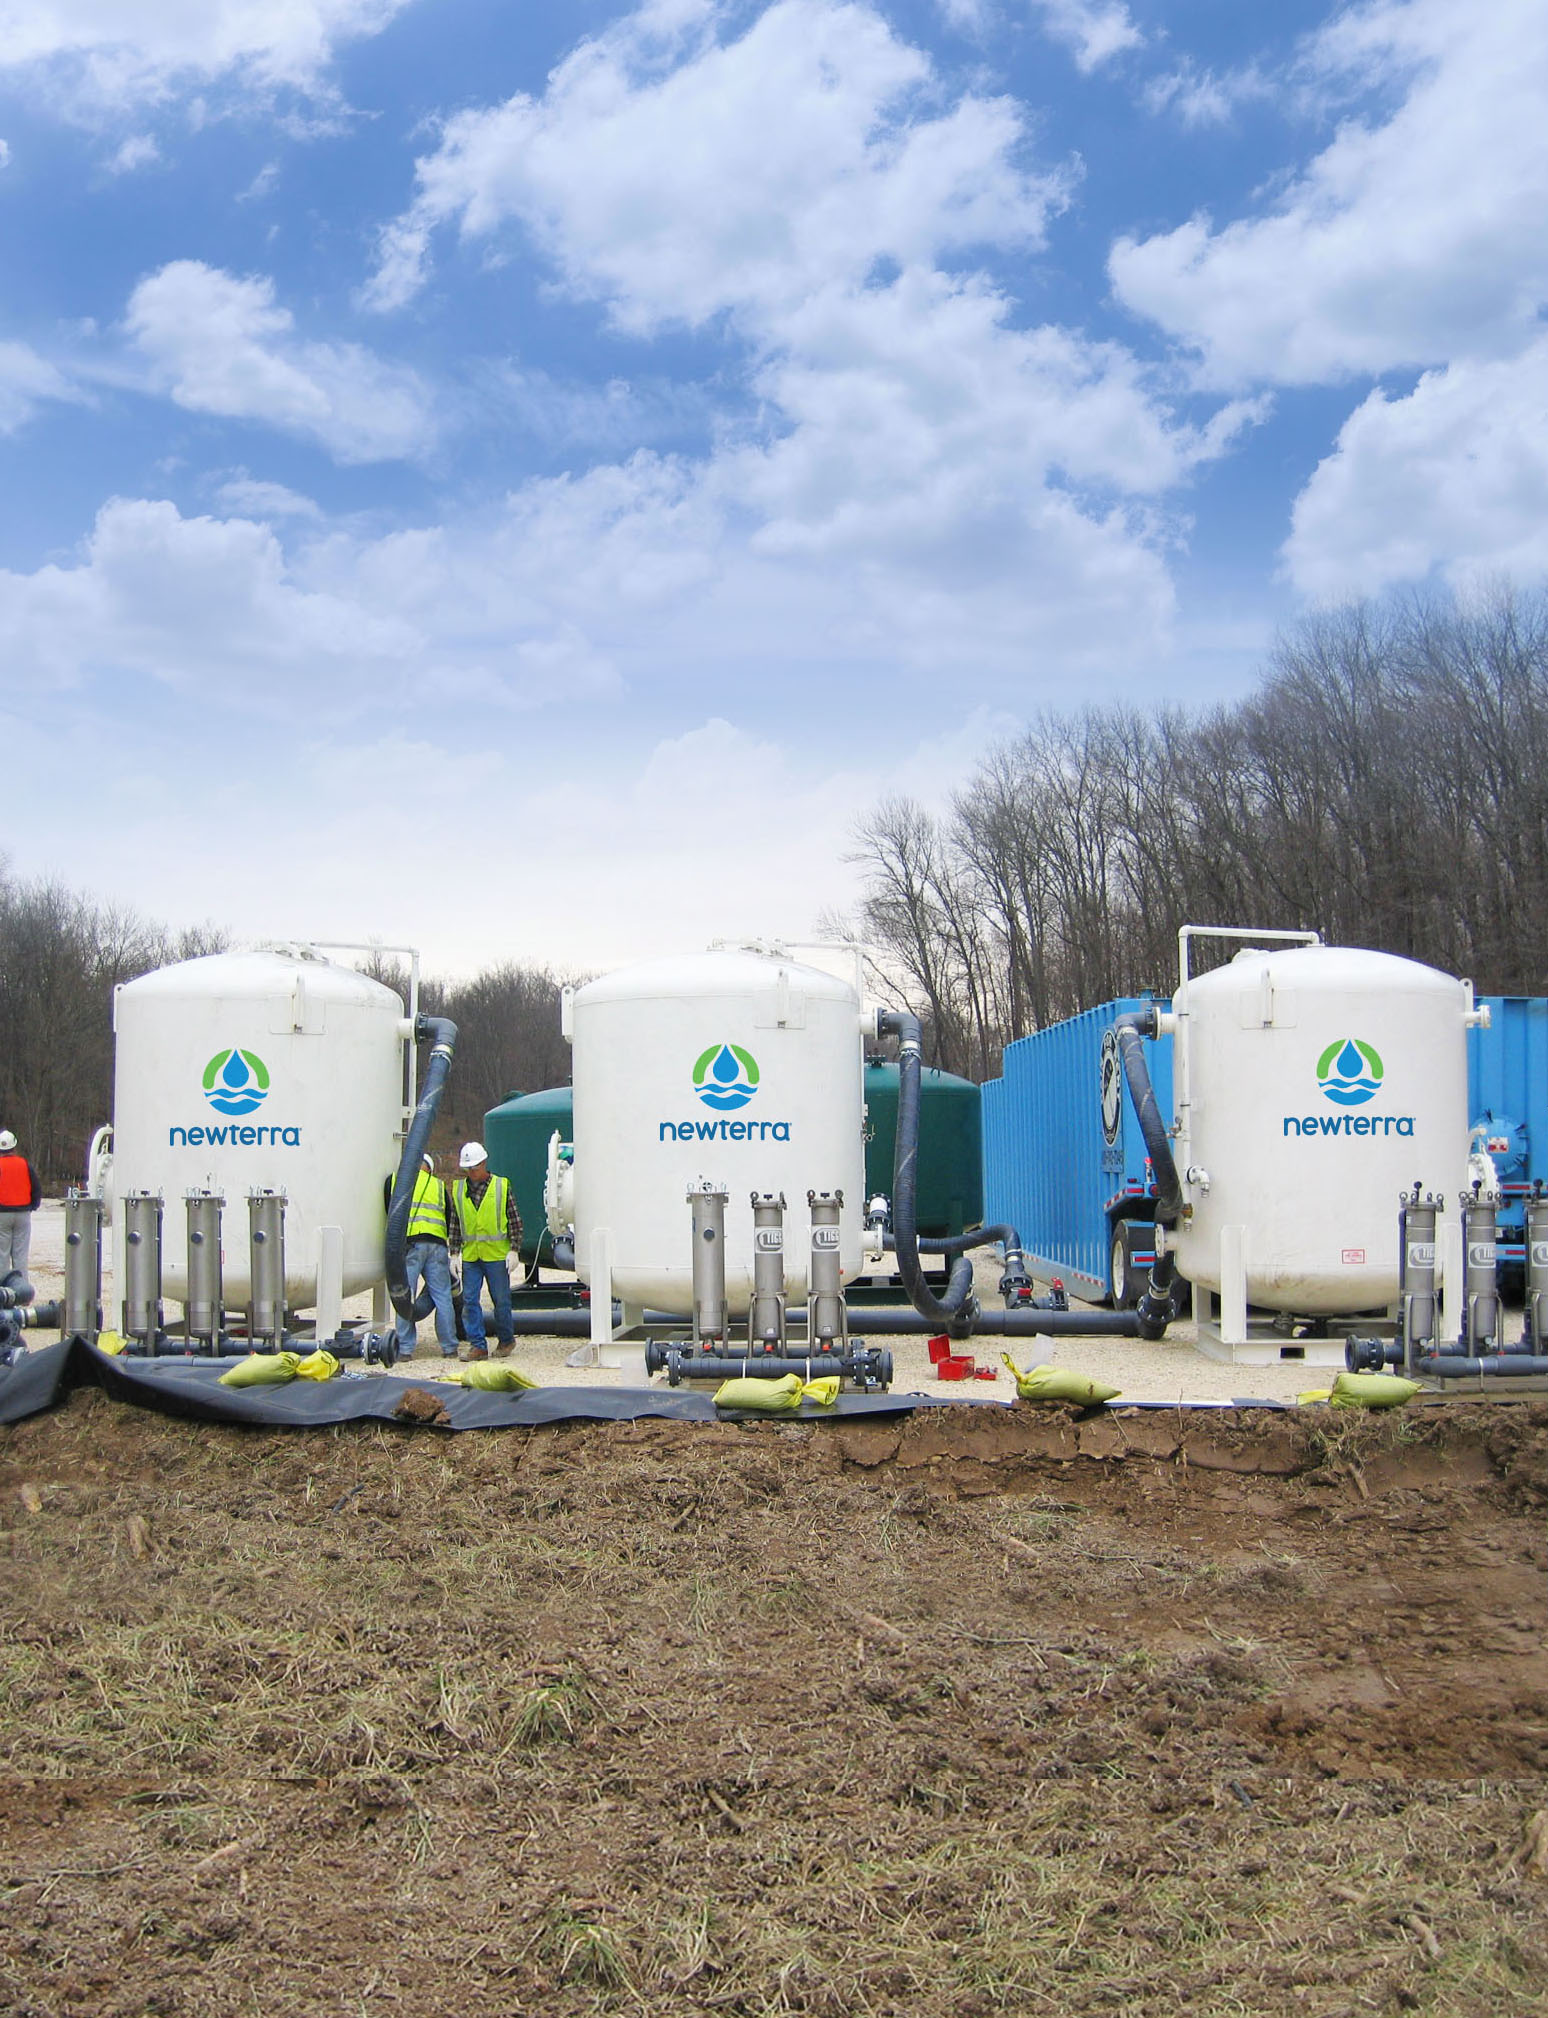 Three technicians inspect three Newterra branded tanks used for treating wastewater in an outdoor setting surrounded by trees